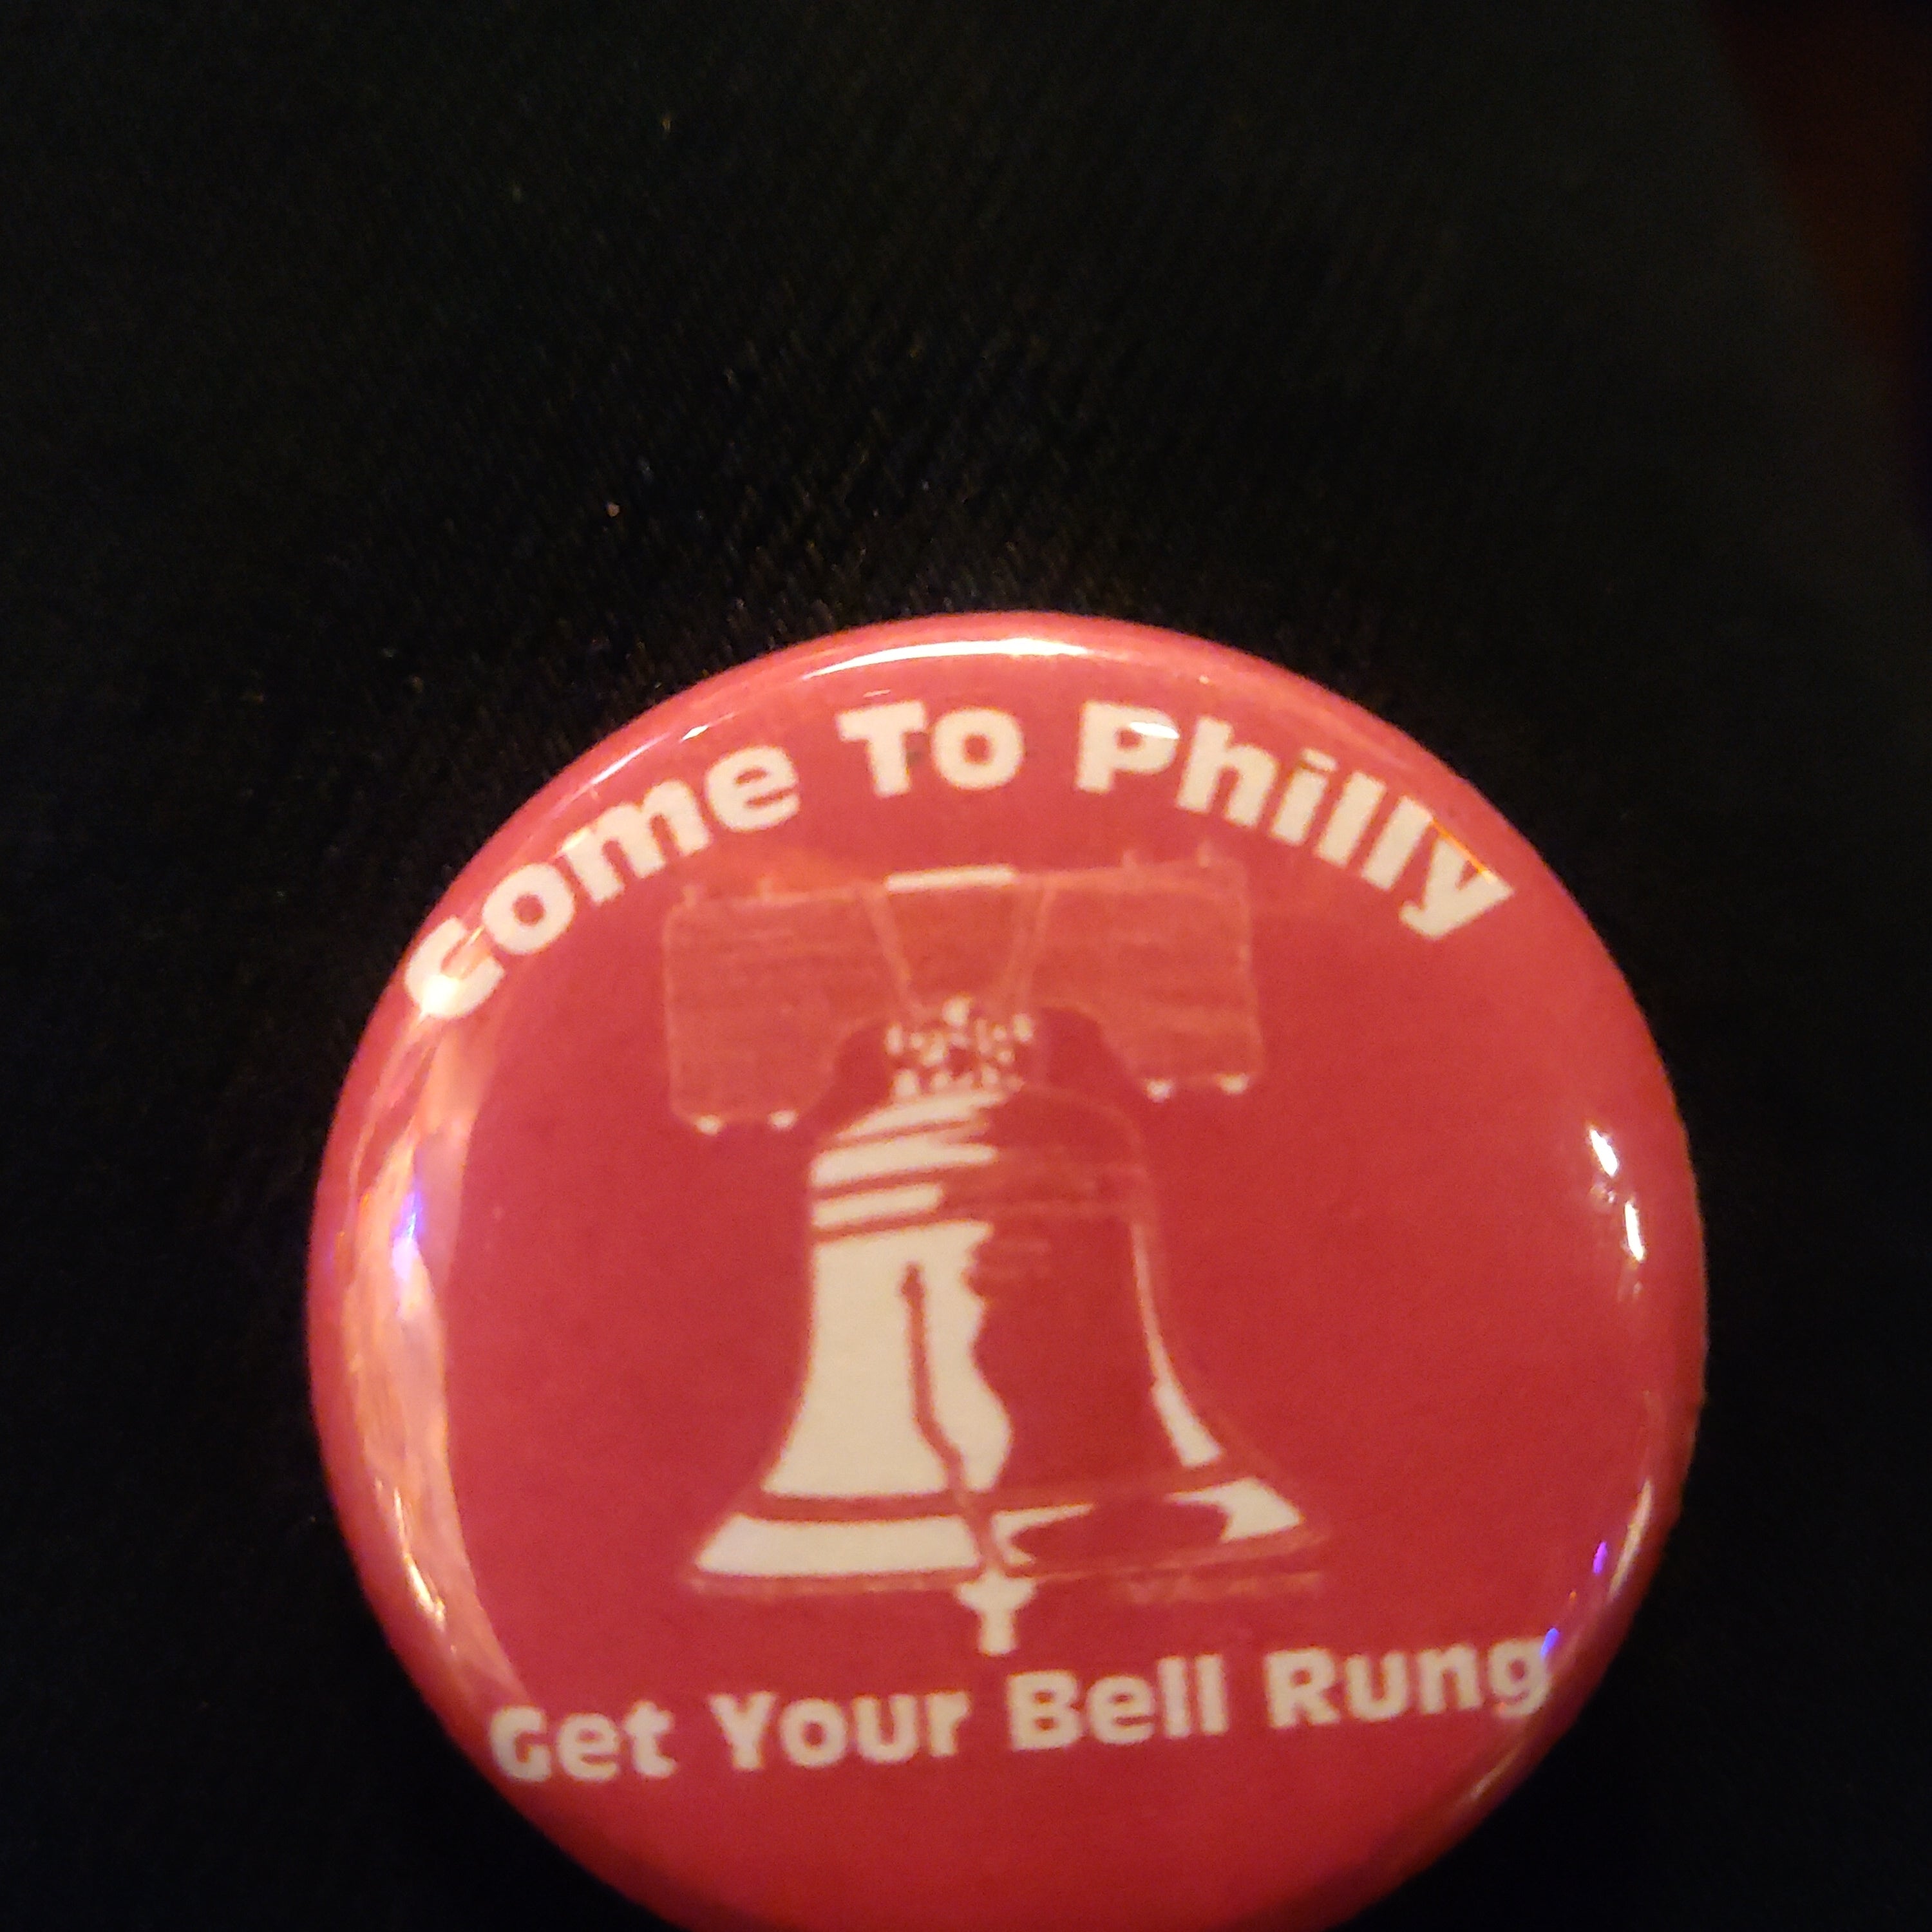 Come to Philly Get Your Bell Rung PIN